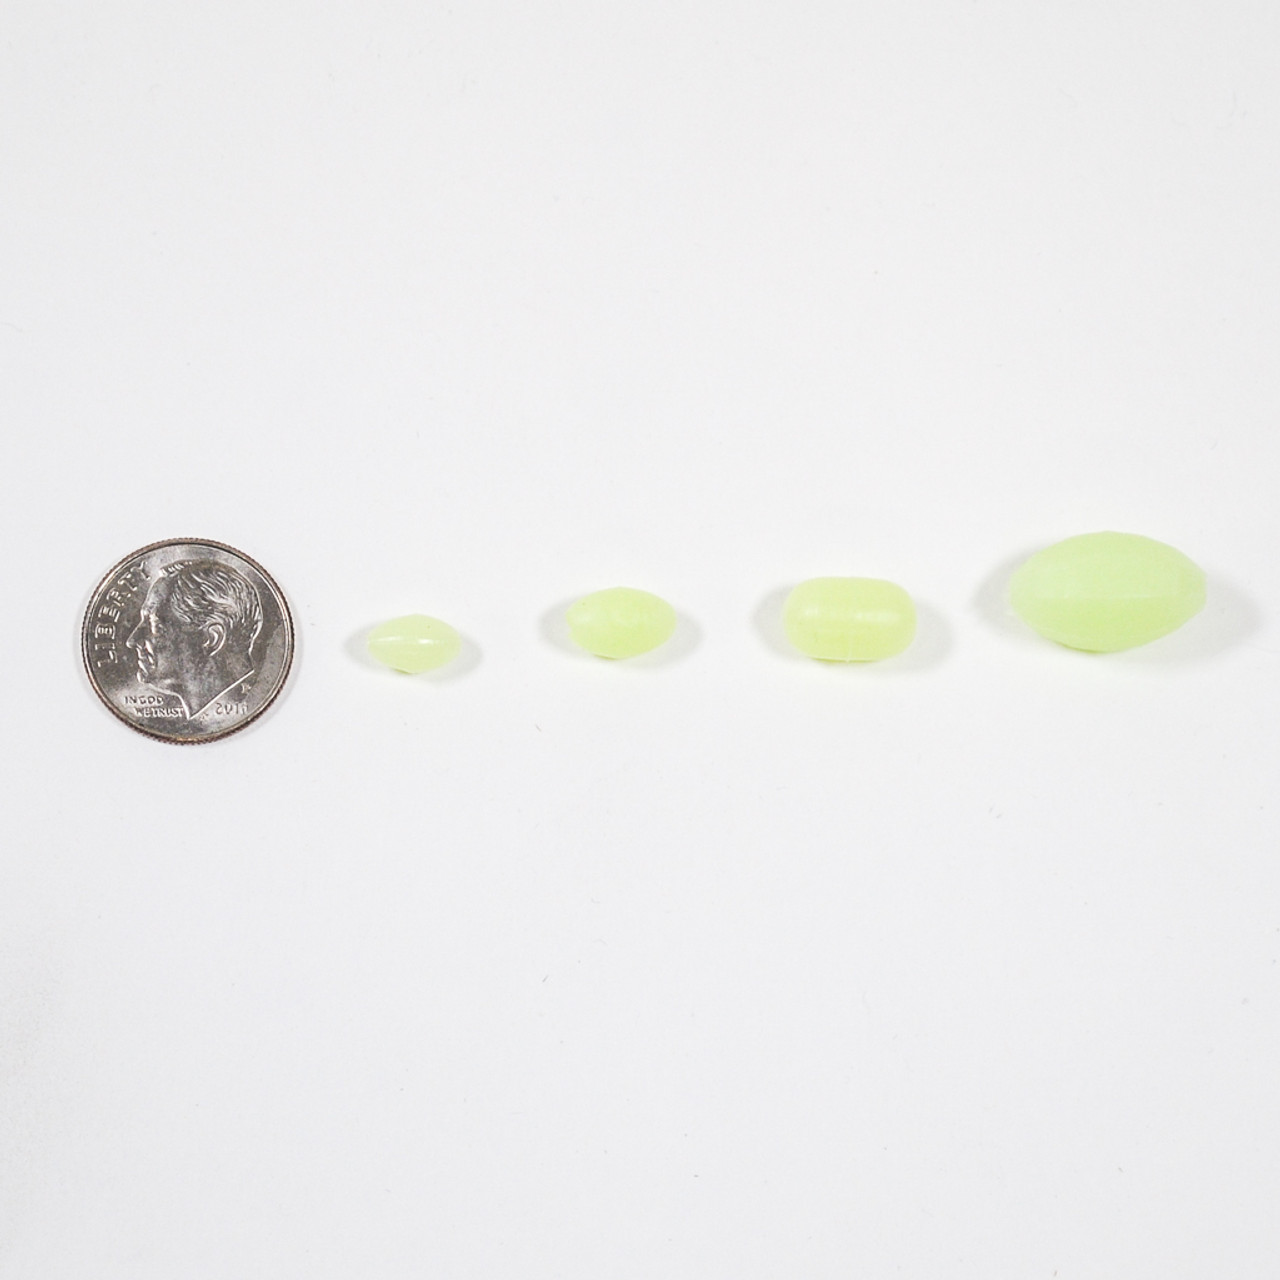 Soft Glow Beads Green available in 4 sizes 